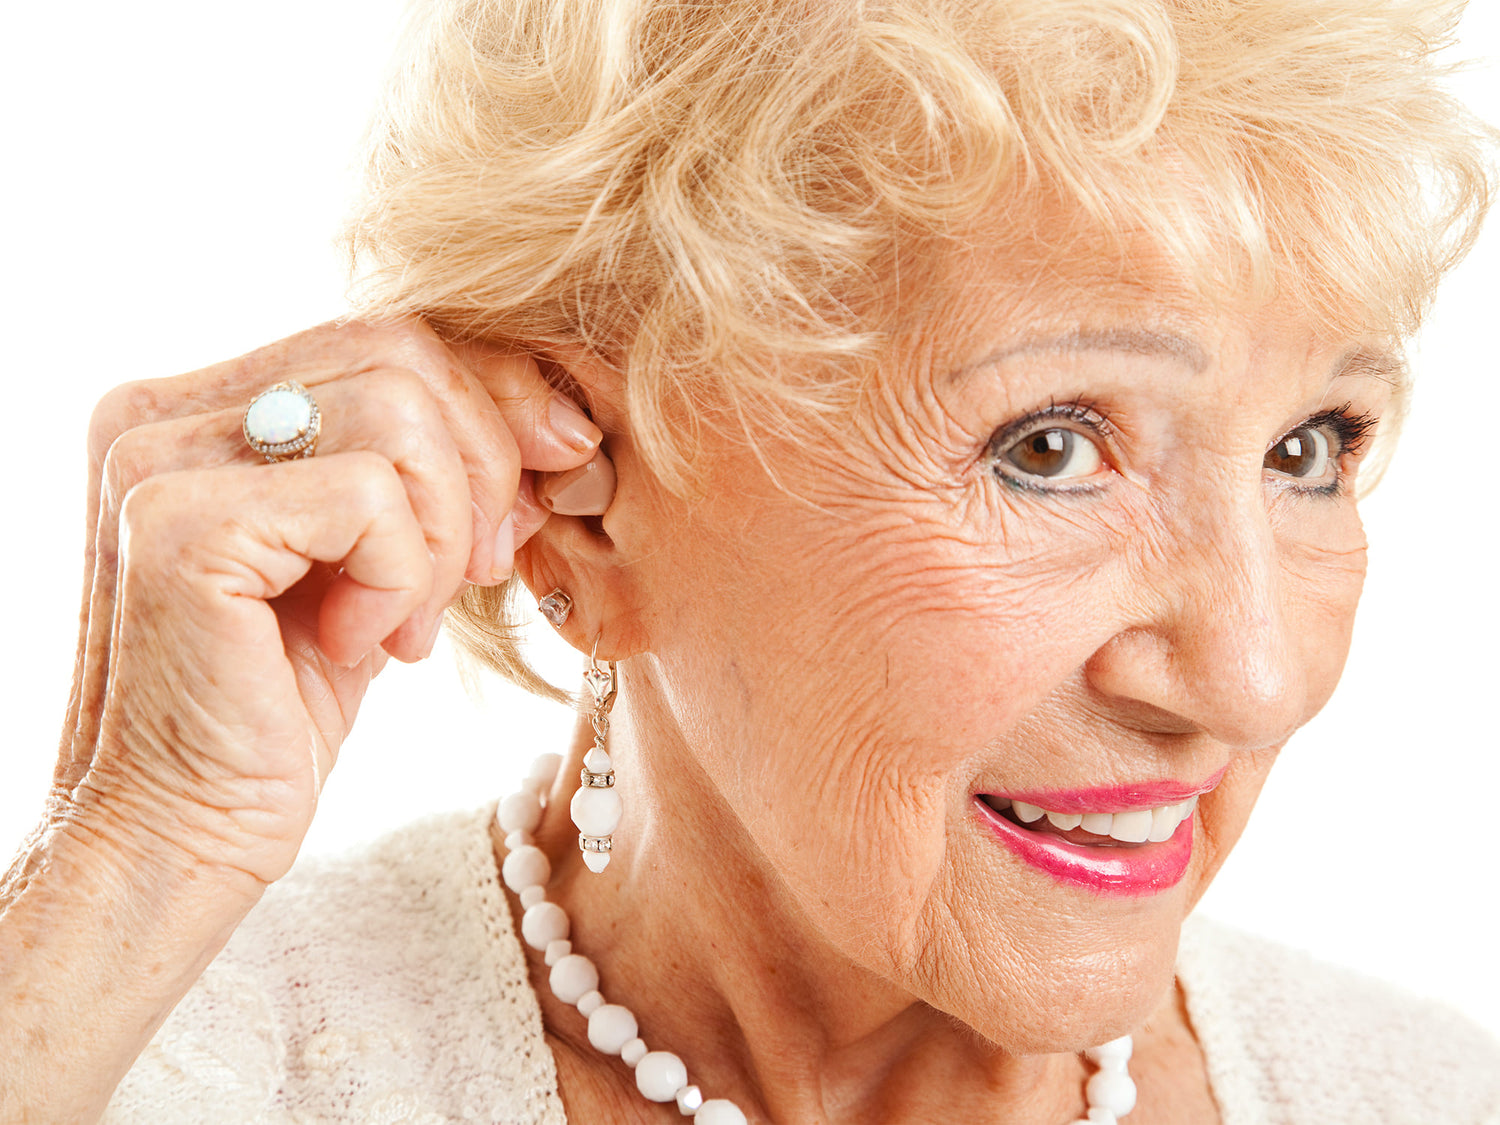 Common Styles Of Hearing Aids